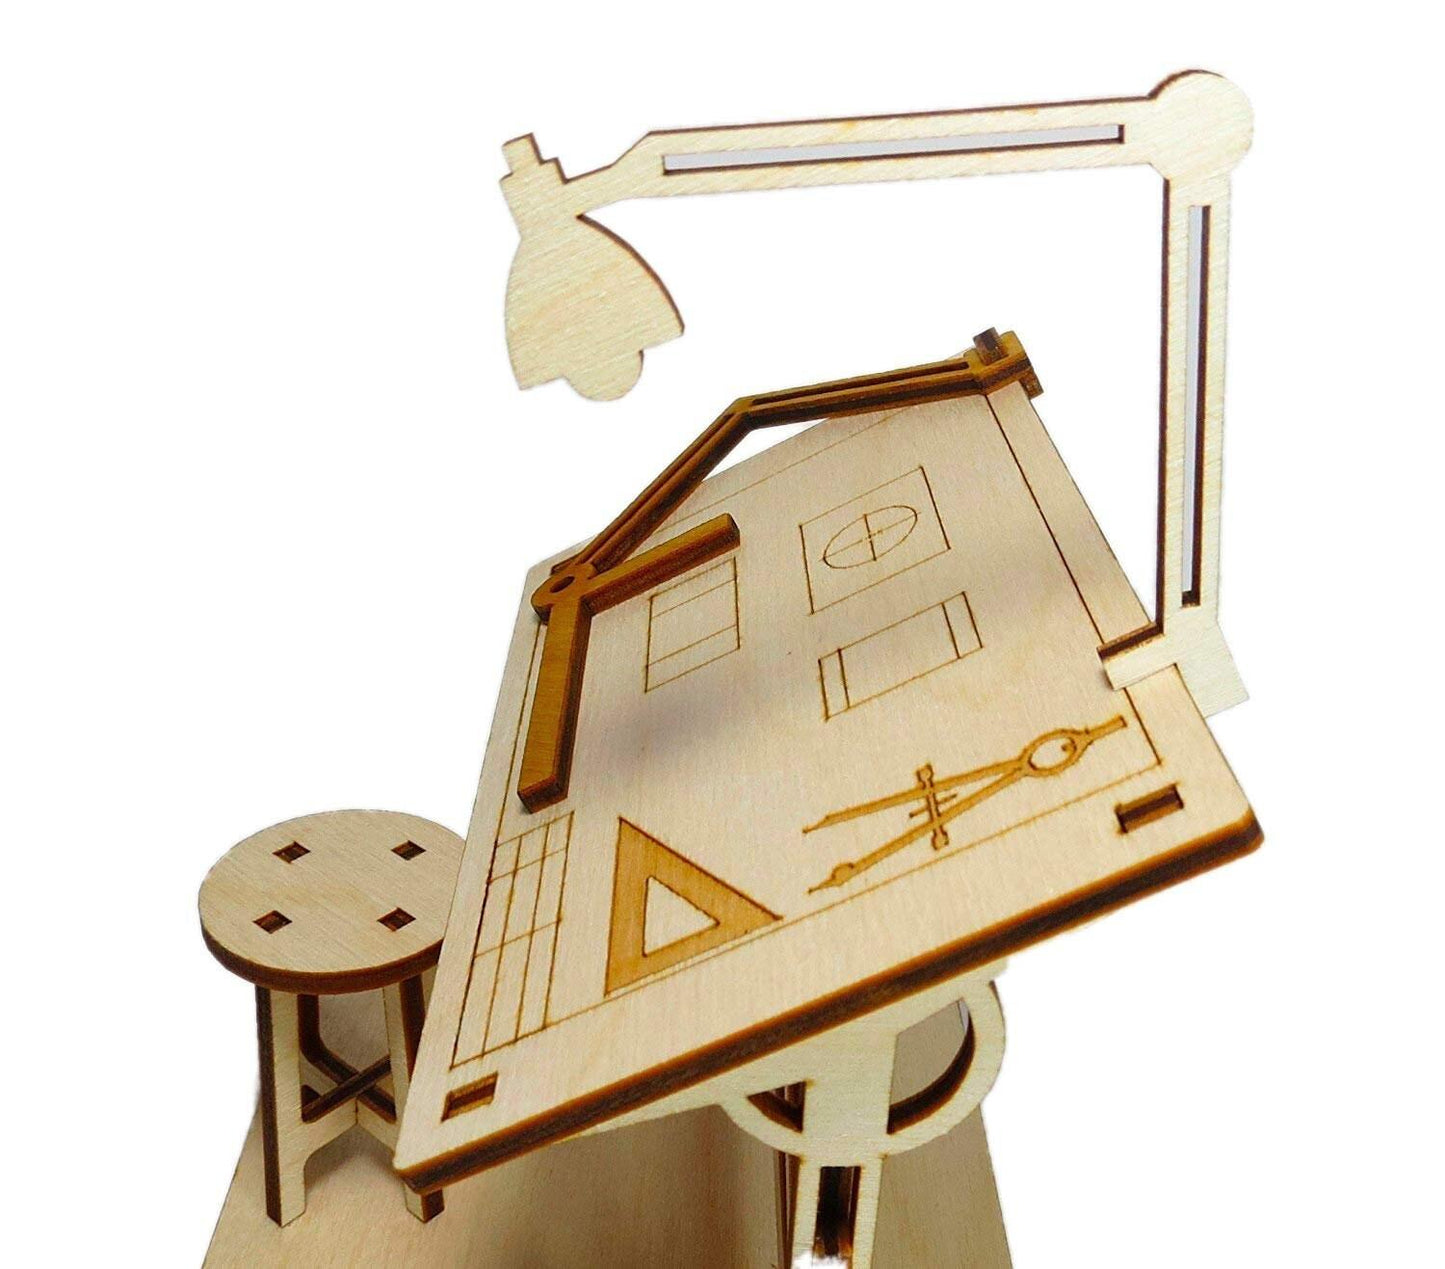 DIY Gifts For Architects & Designers - Drafting Table Kit - DIY Wooden Desk Miniature Furniture With Chair - 3D Wooden Puzzle - Best Gifts